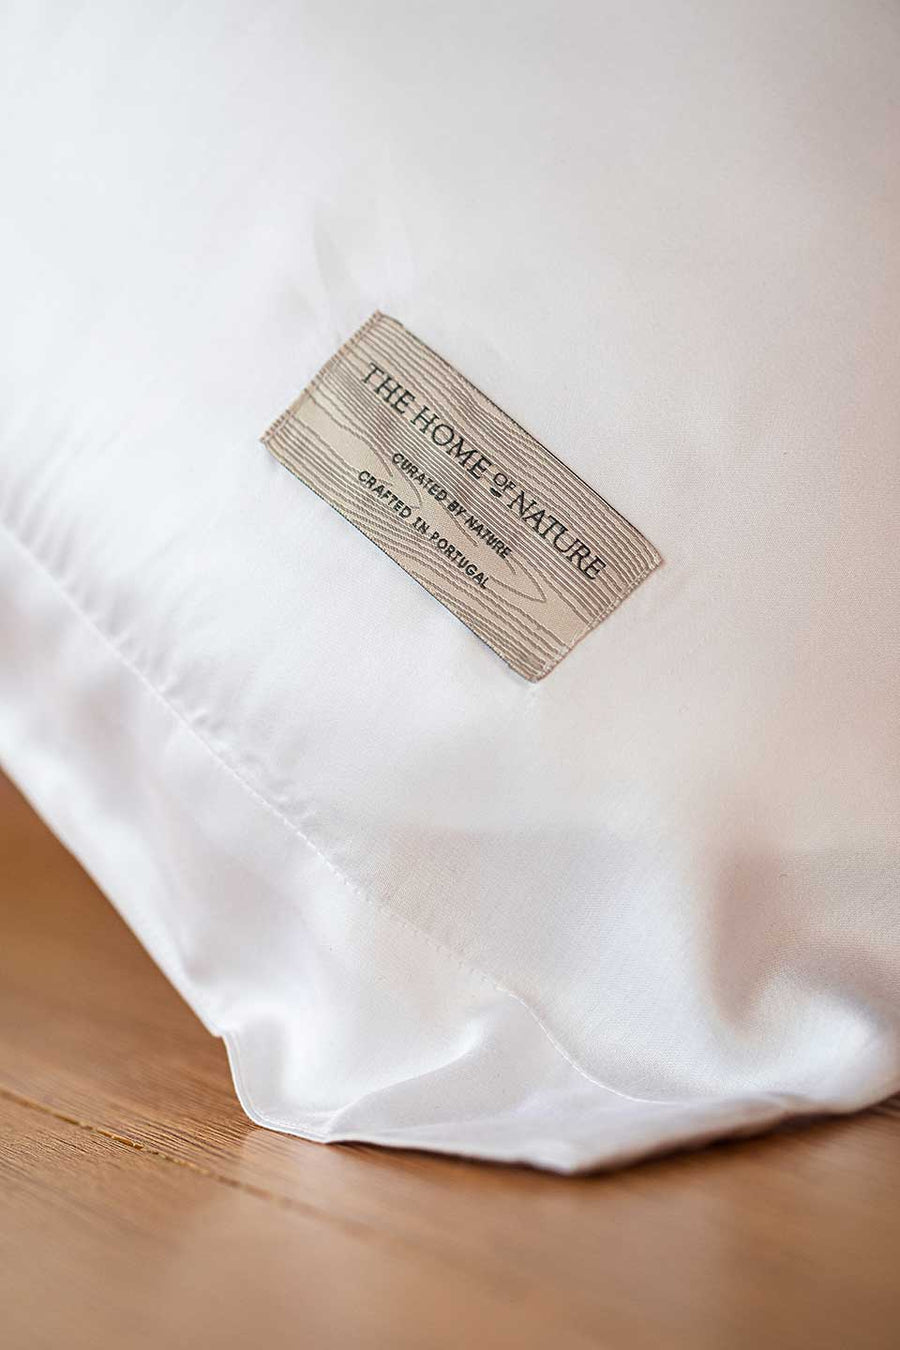 The Home of Nature label on a white TENCEL™ Lyocell Sateen duvet cover.